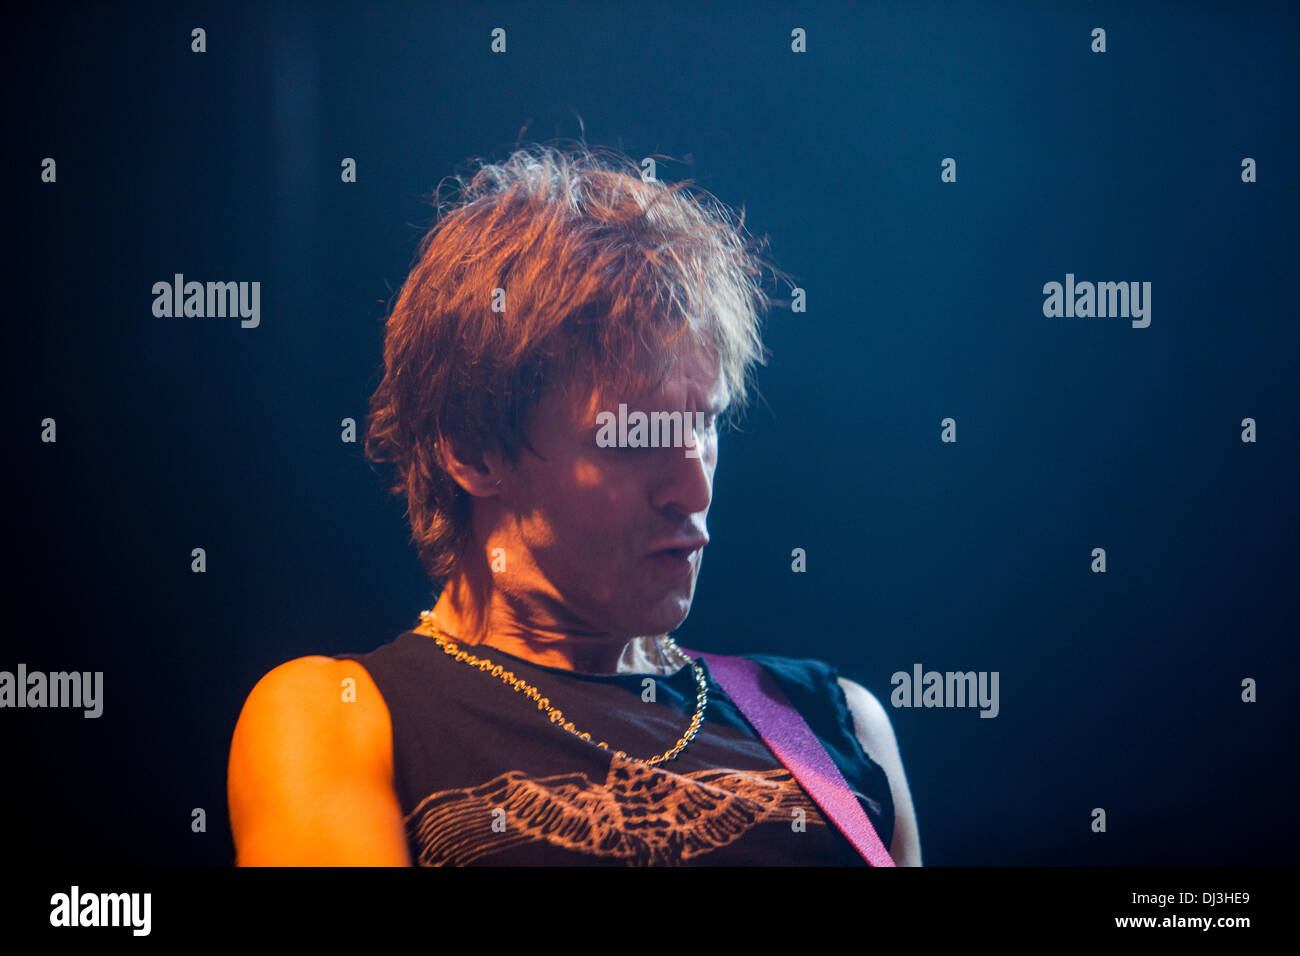 London, UK. 20th November 2013. Kenwyn House, Reef guitarist performing at one-off KOKO show as part of their 20th Anniversary Tour. London, UK 20th November 2013. Credit:  martyn wheatley/Alamy Live News Stock Photo